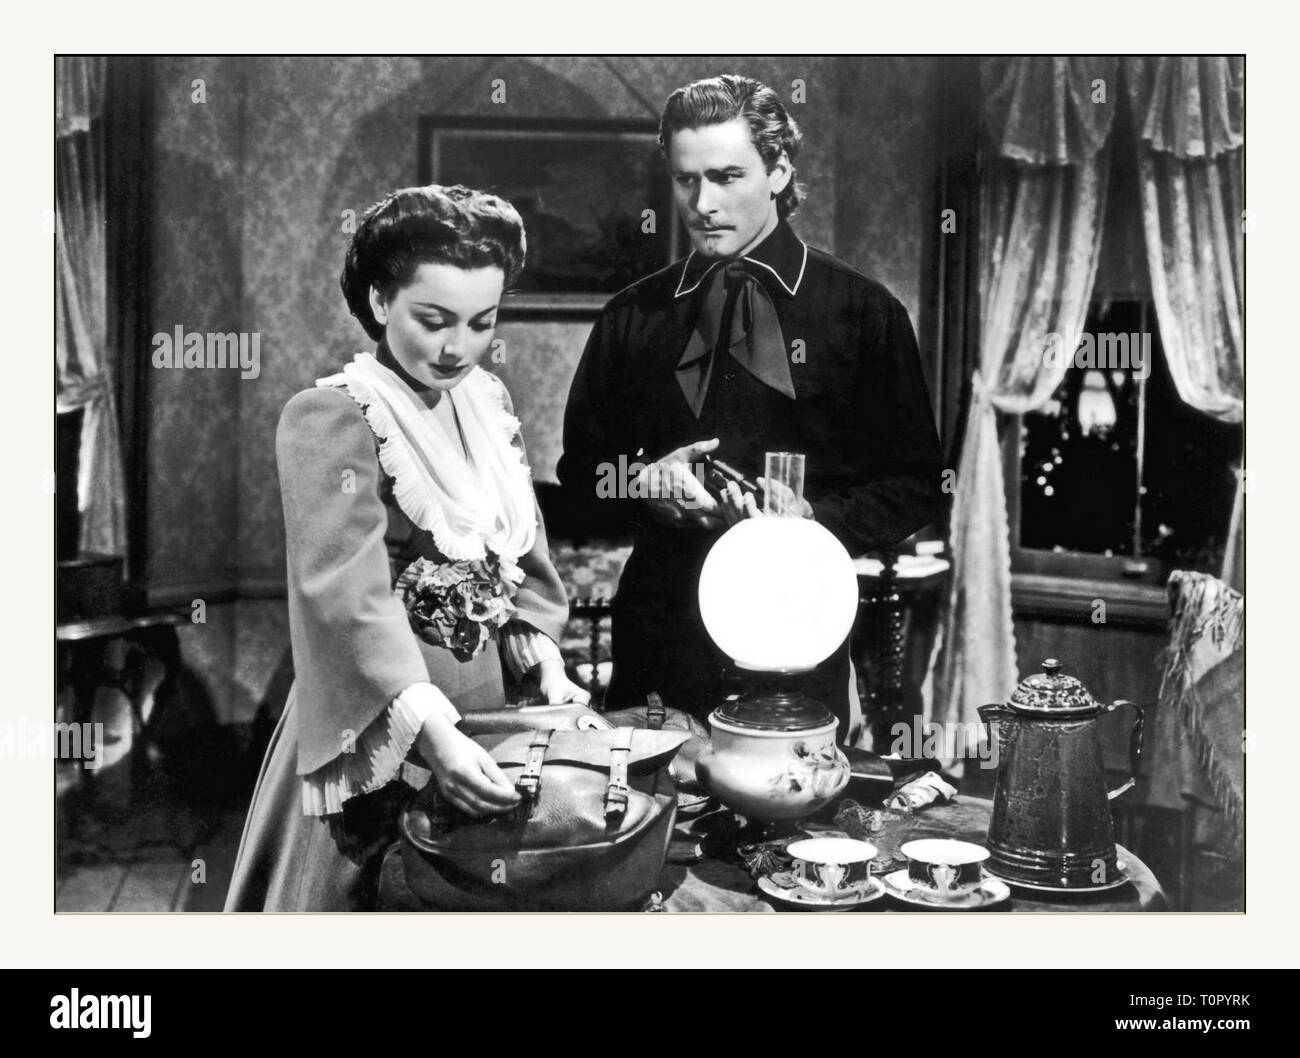 1941 black-and-white American western film from Warner Bros. Pictures, produced by Hal B. Wallis and Robert Fellows, directed by Raoul Walsh, that stars Errol Flynn and Olivia de Havilland.  The film's storyline offers a highly fictionalized account of the life of Gen. George Armstrong Custer, from the time he enters West Point military academy through the American Civil War and finally to his death at the Battle of the Little Bighorn. Custer is portrayed as a fun-loving, dashing figure who chooses honor and glory over money and corruption. The battle against Chief Crazy Horse is portrayed as  Stock Photo